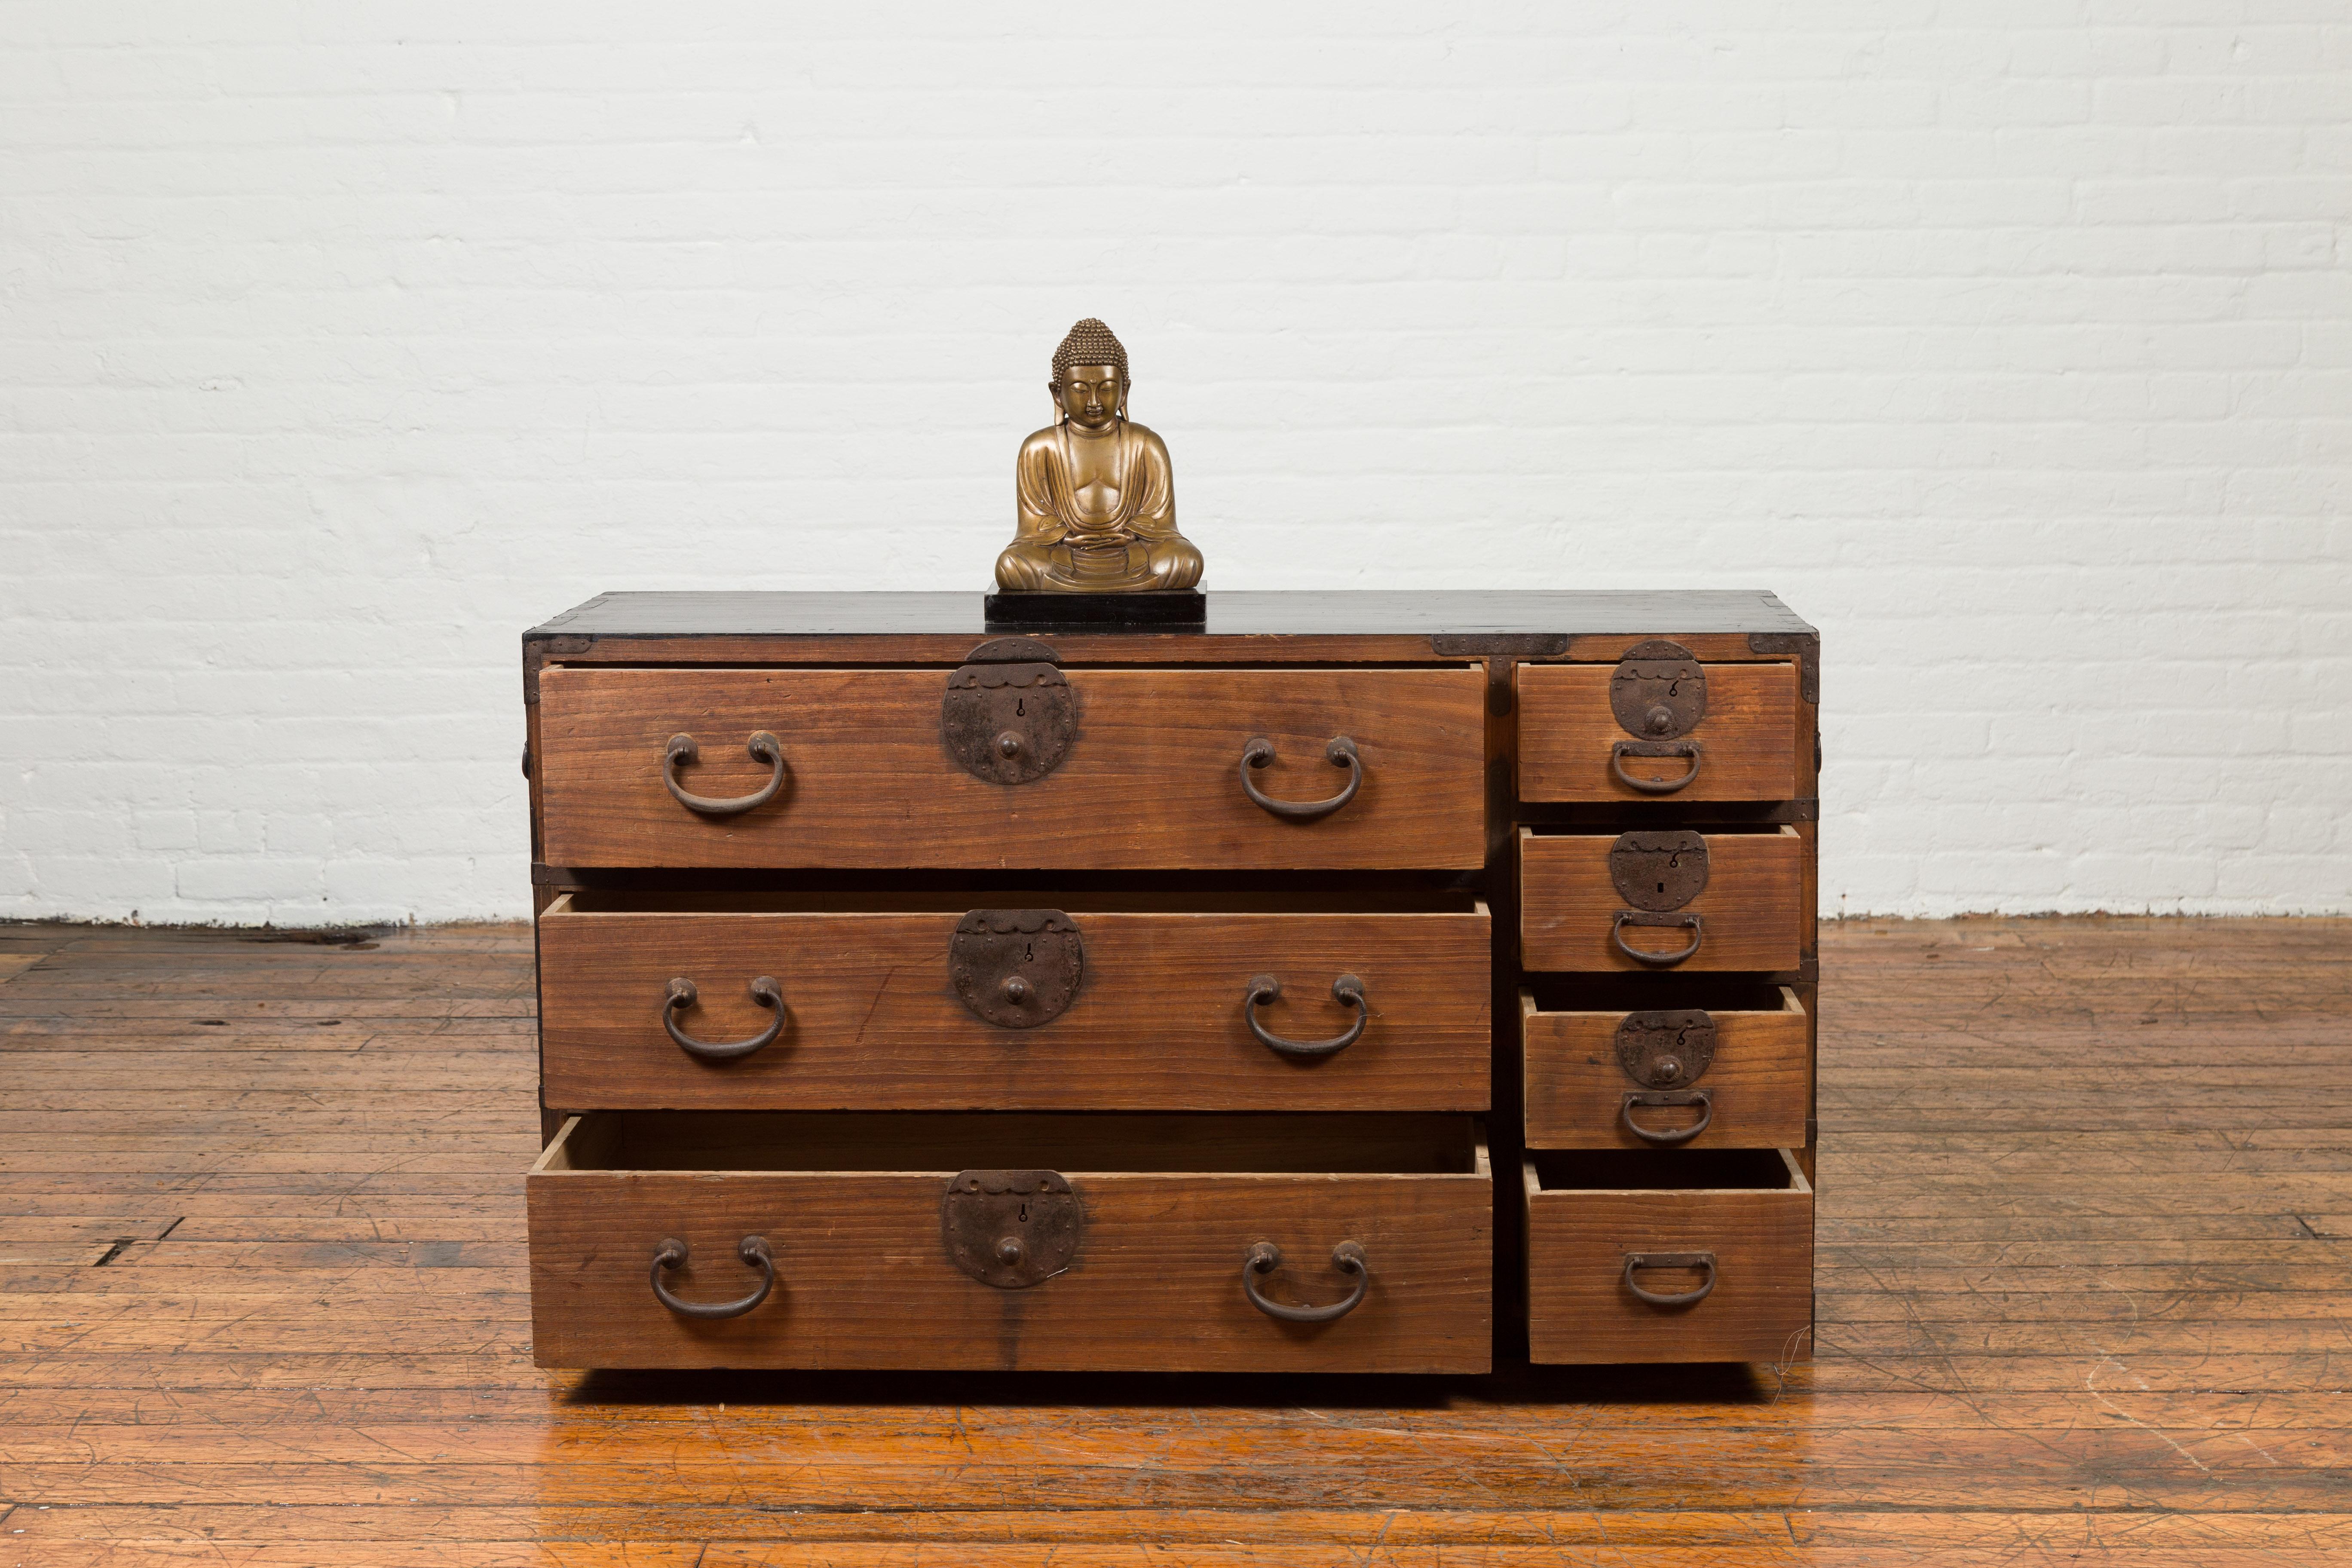 19th Century Japanese Late Meiji Period Keyaki Wood Traveling Tansu Chest with Seven Drawers